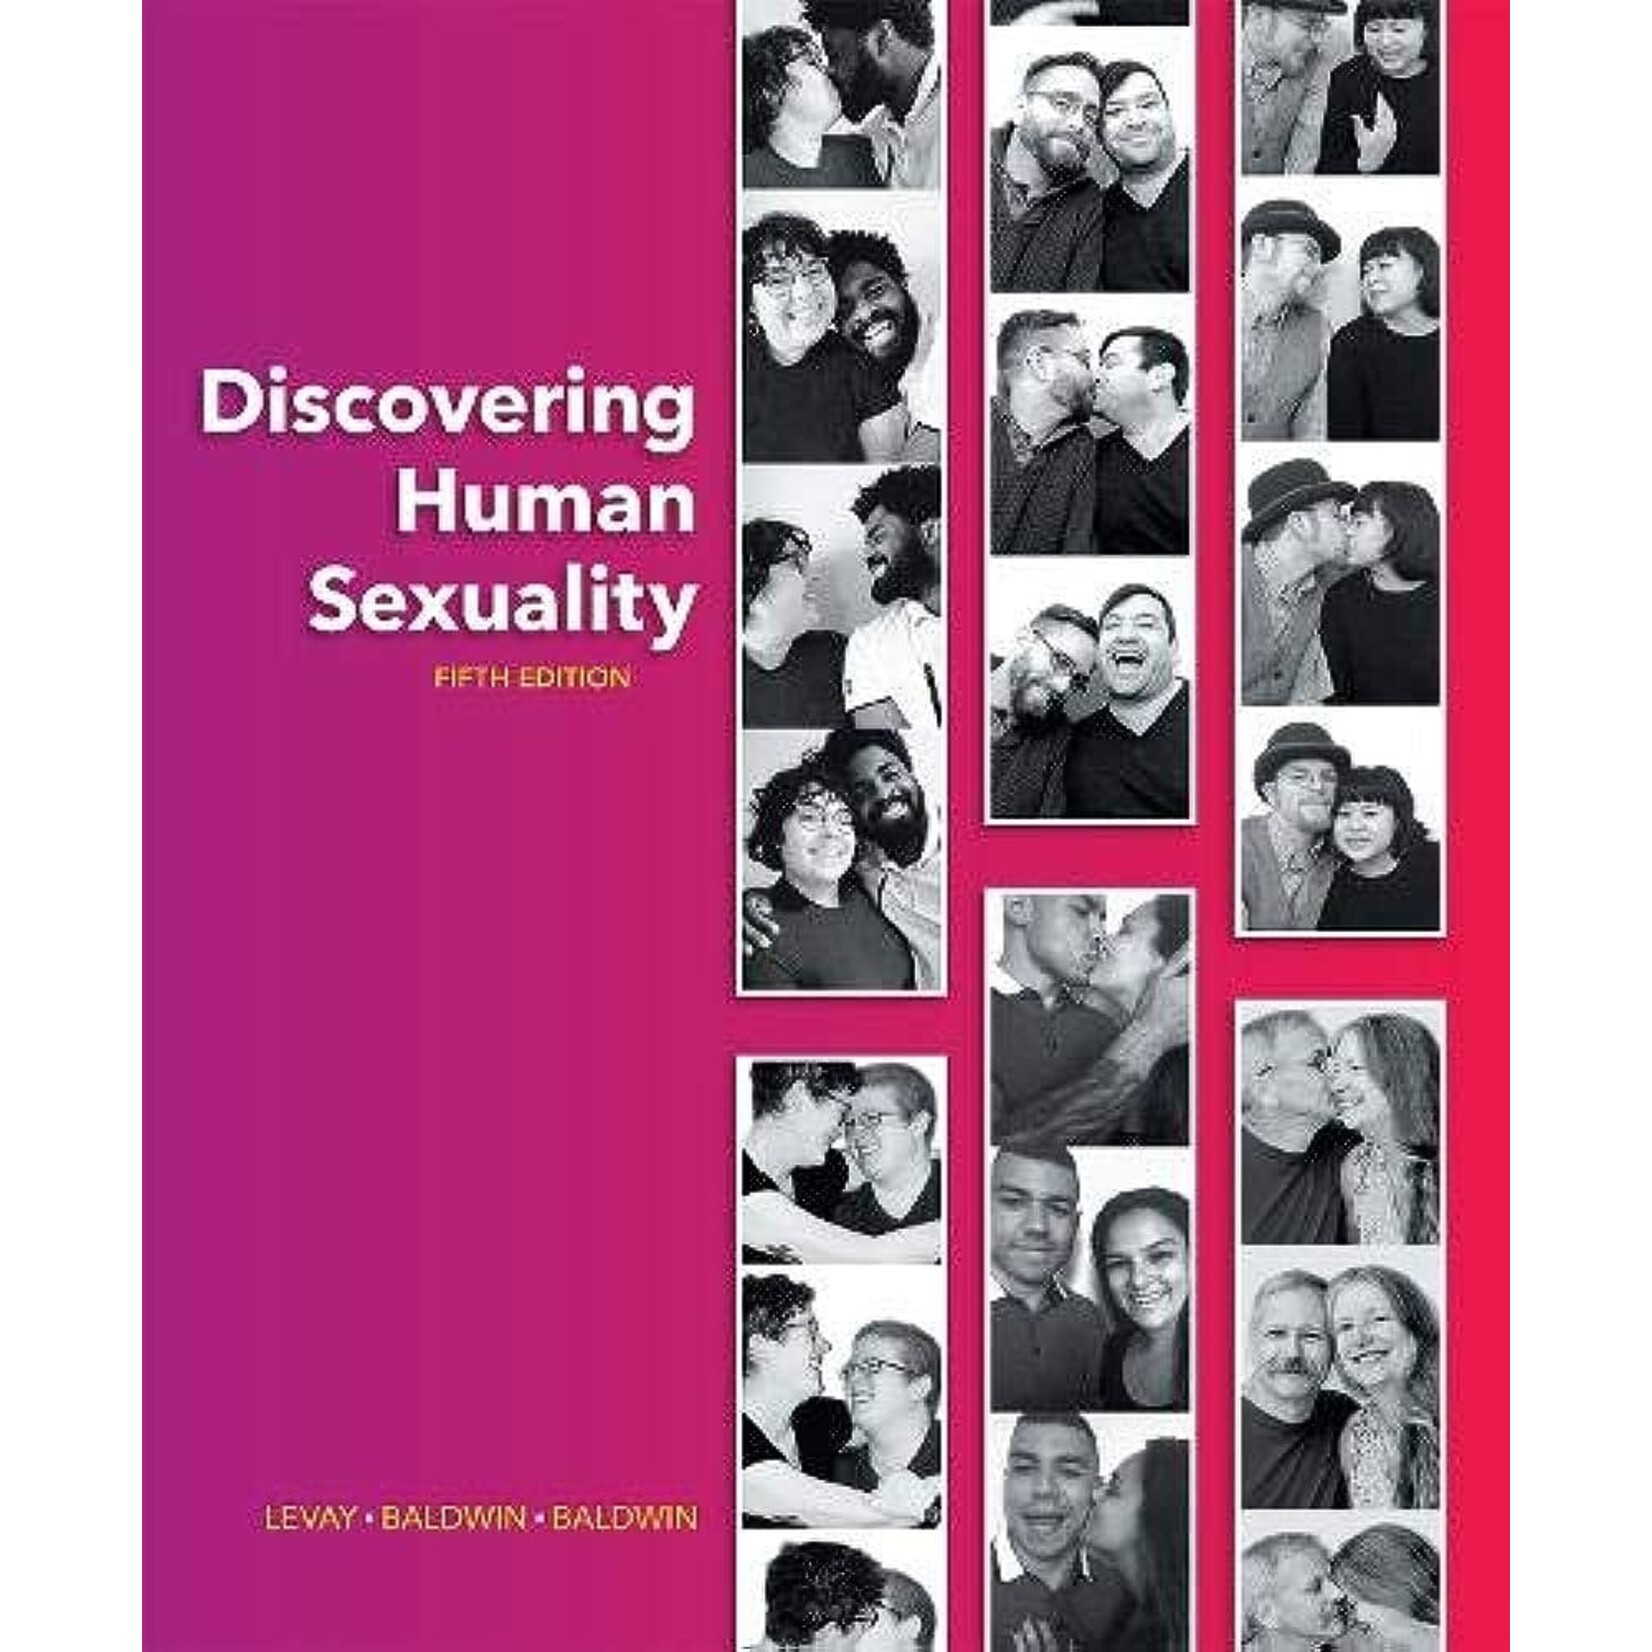 Discovering Human Sexuality, 5th Edition